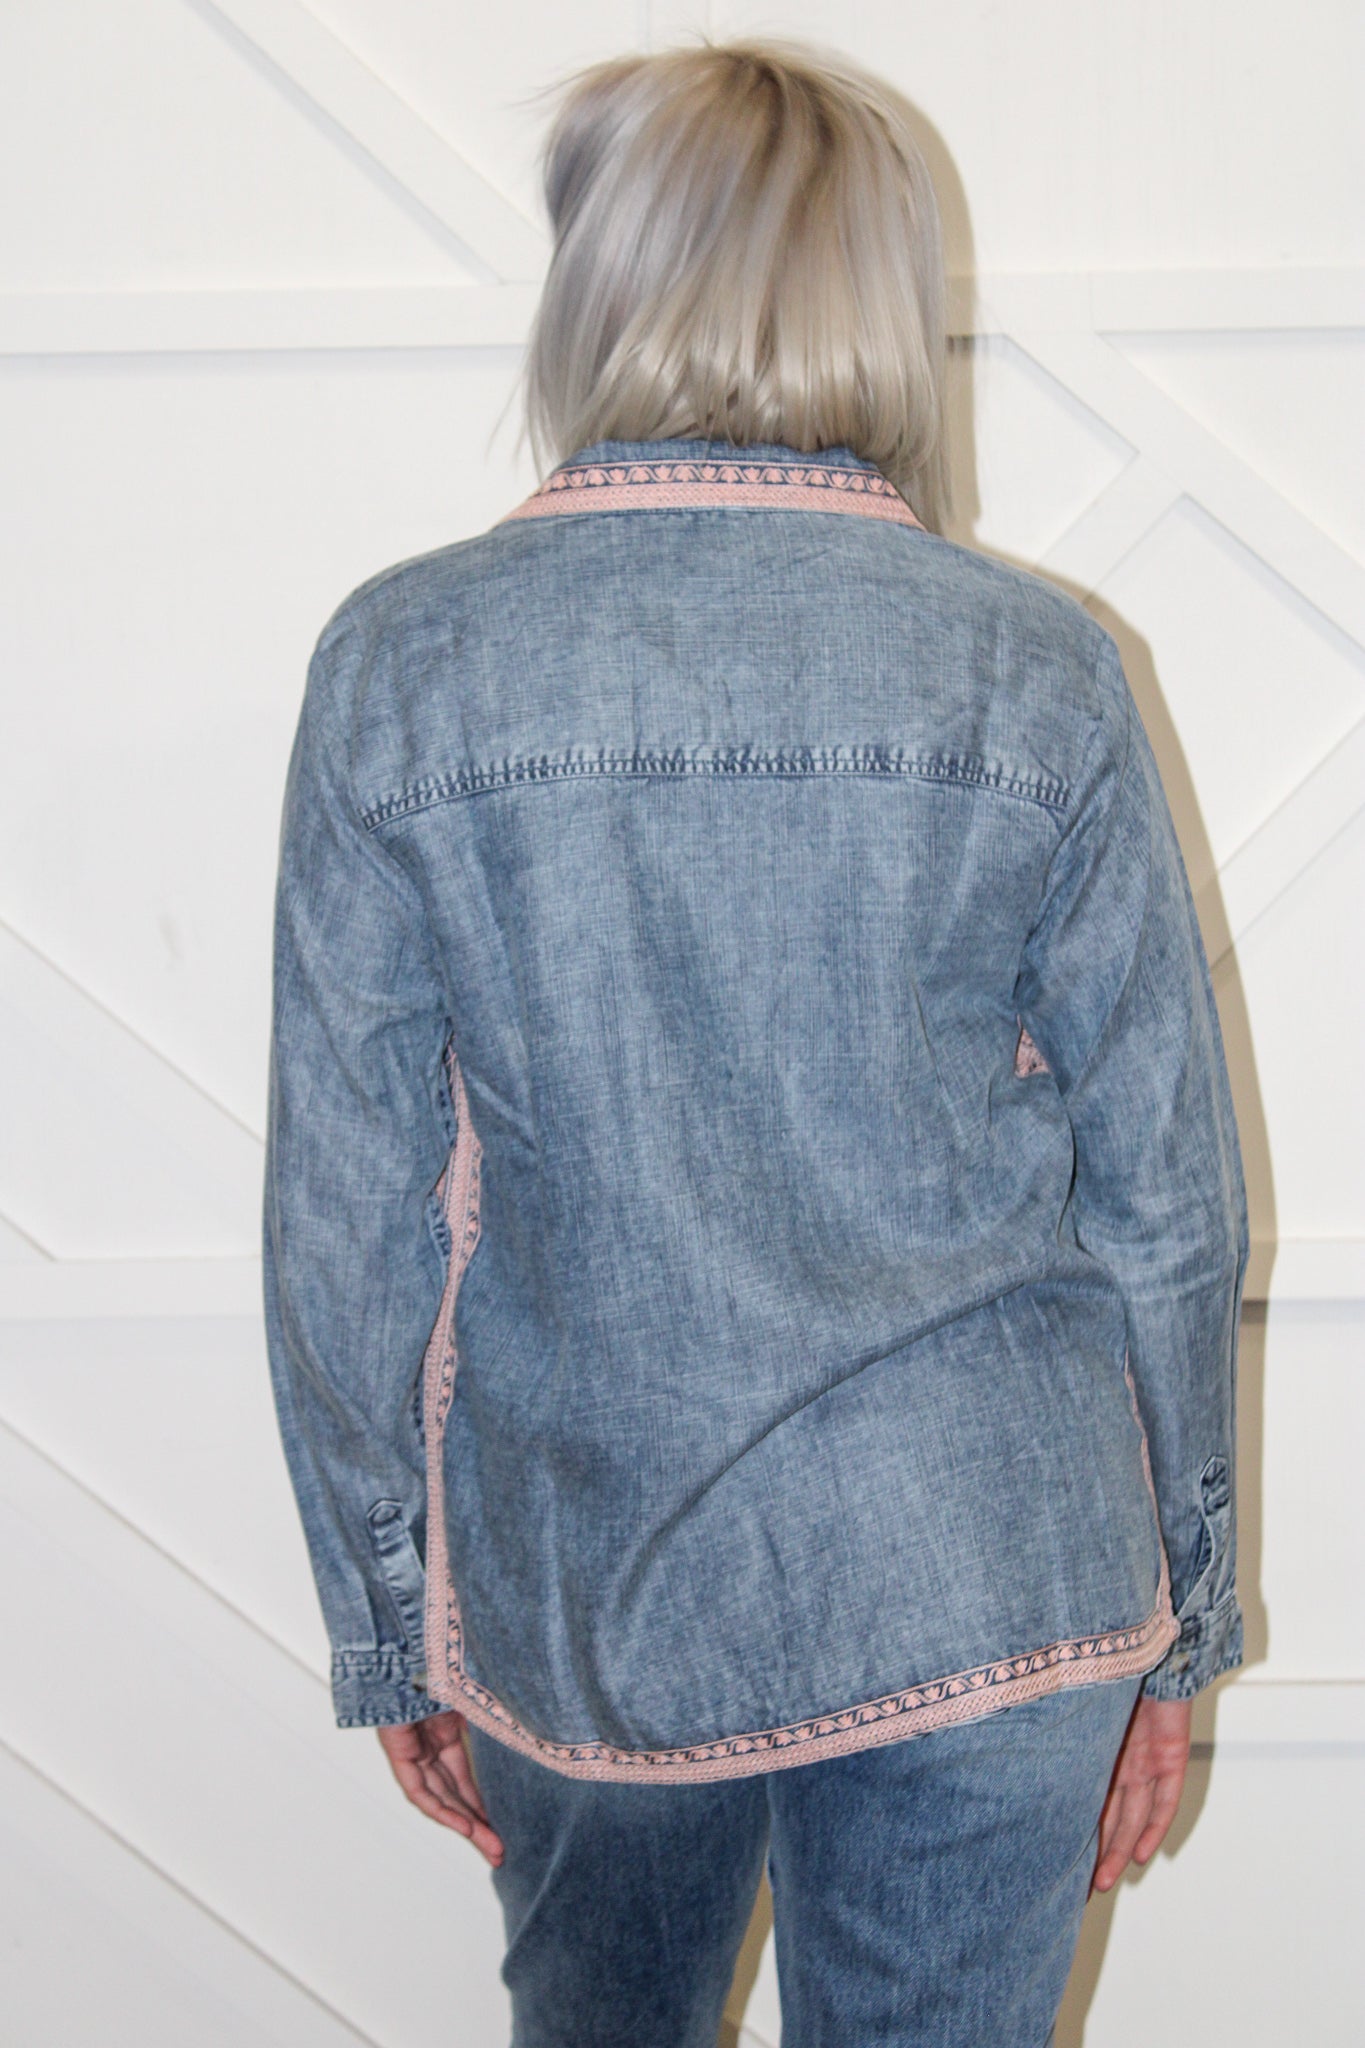 Embroidered Denim Top